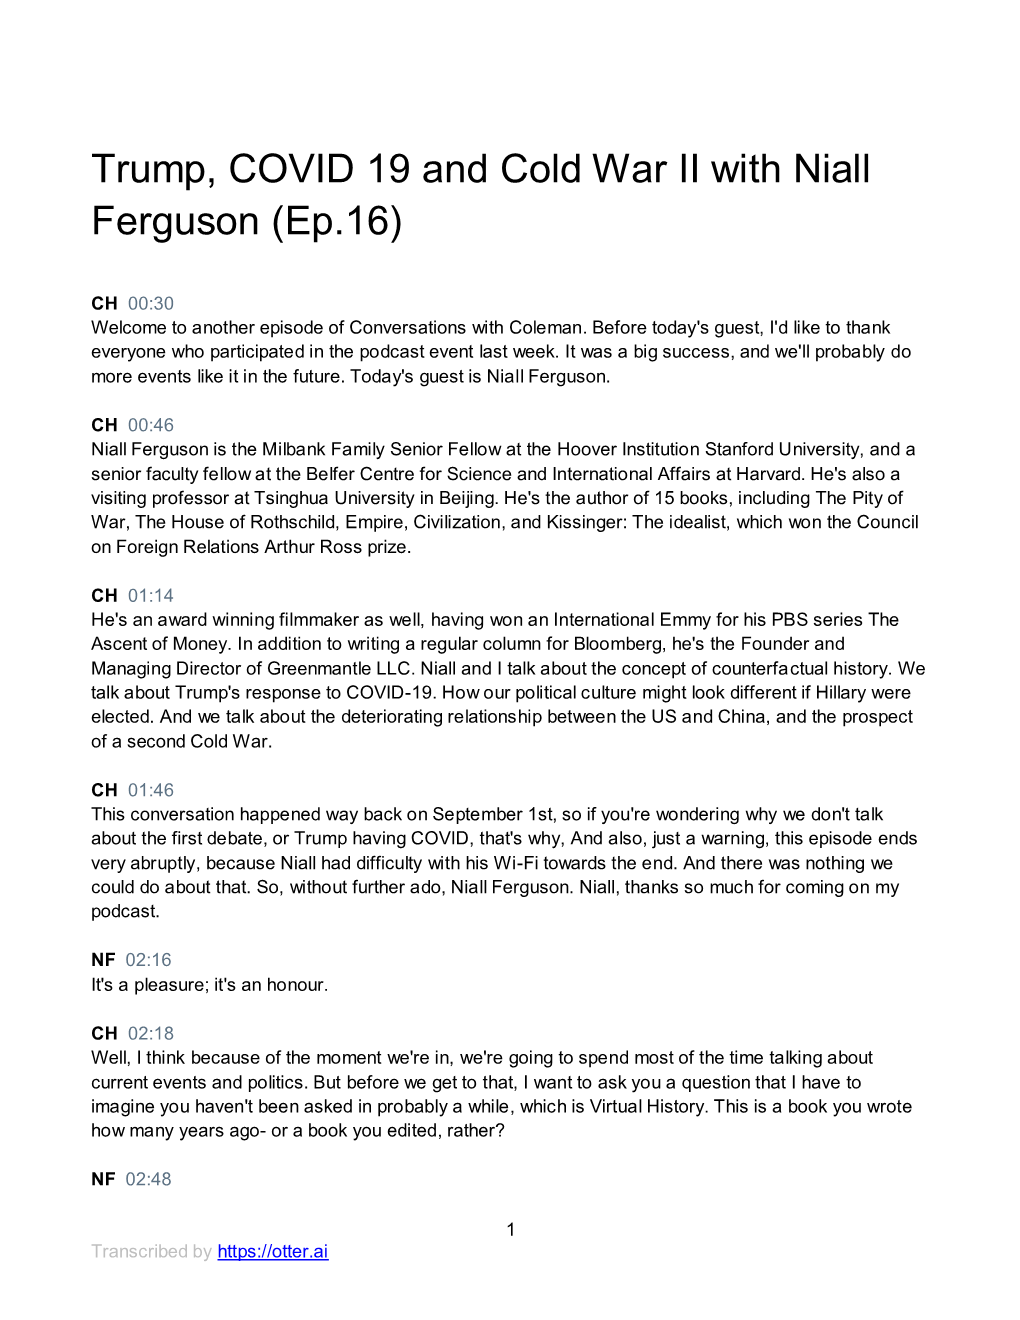 Trump, COVID 19 and Cold War II with Niall Ferguson